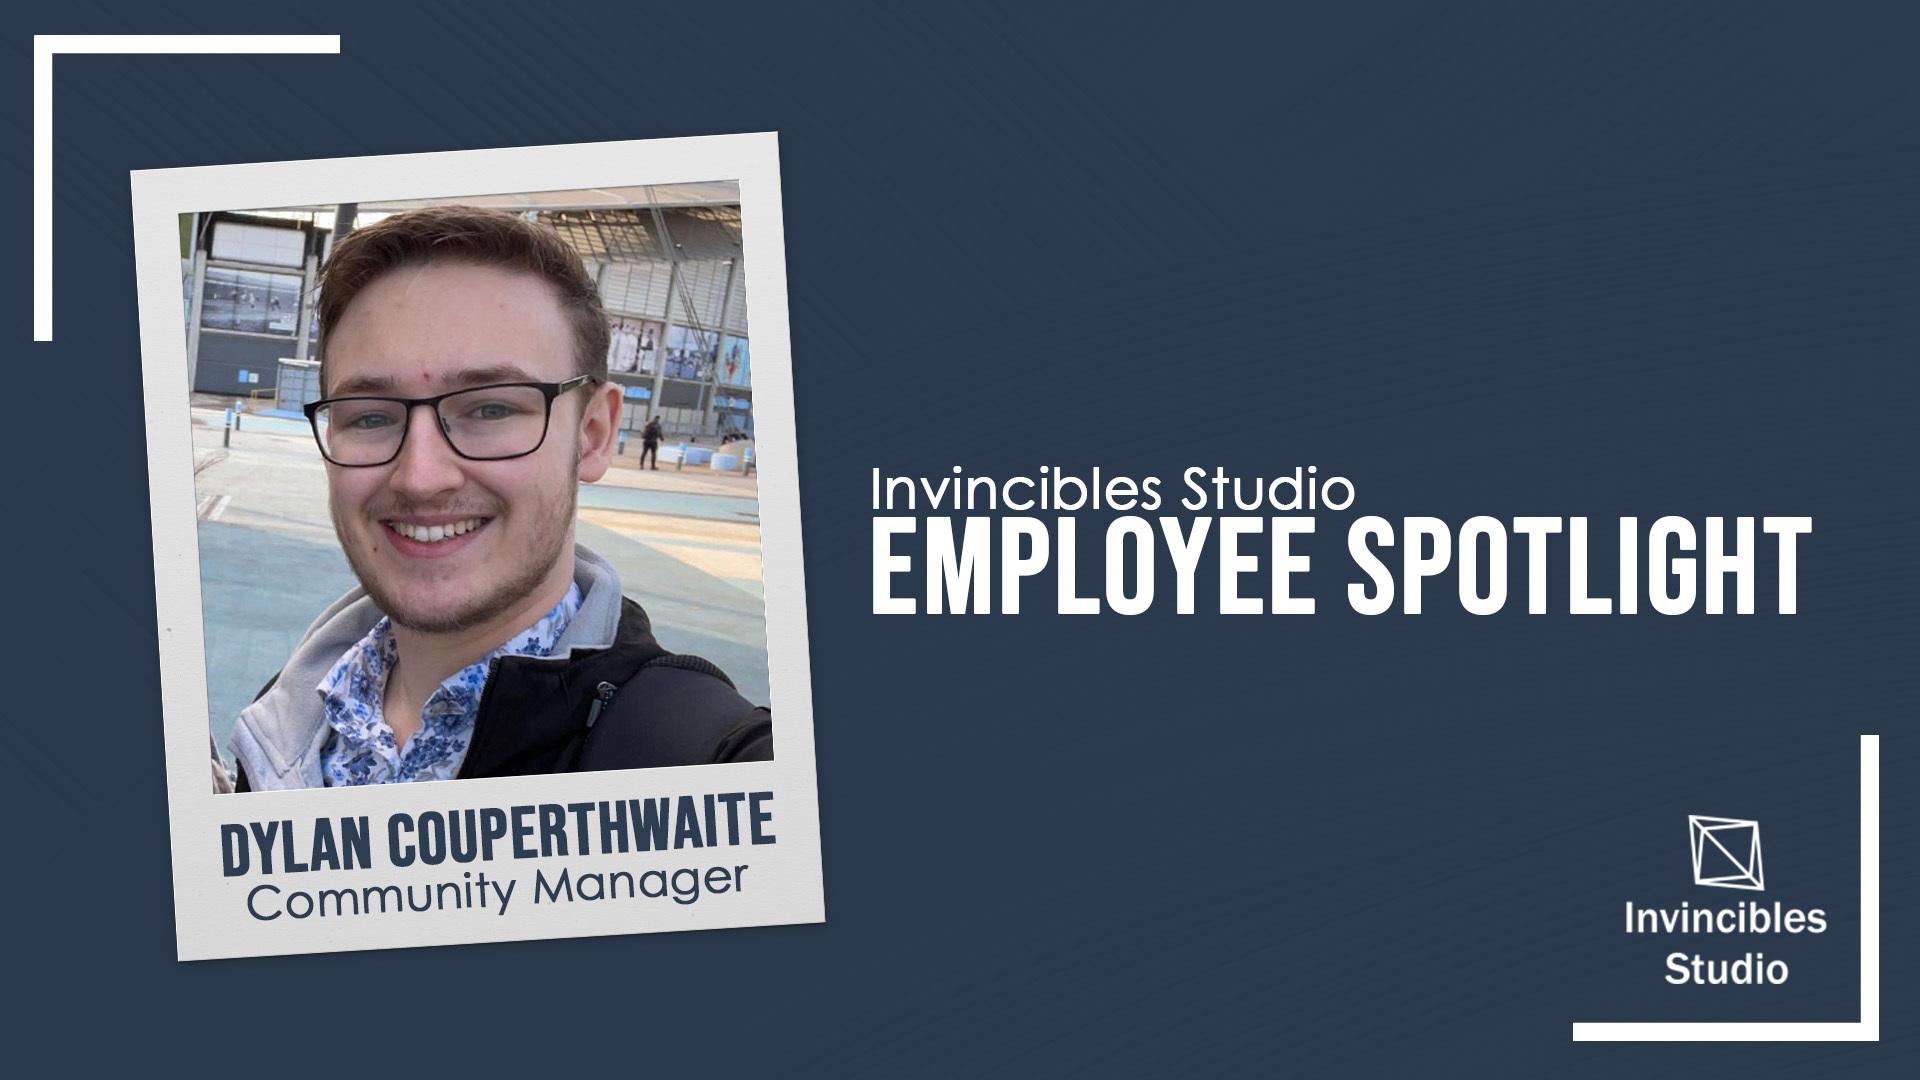 Meet Dylan, Community Manager at Invincibles Studio.